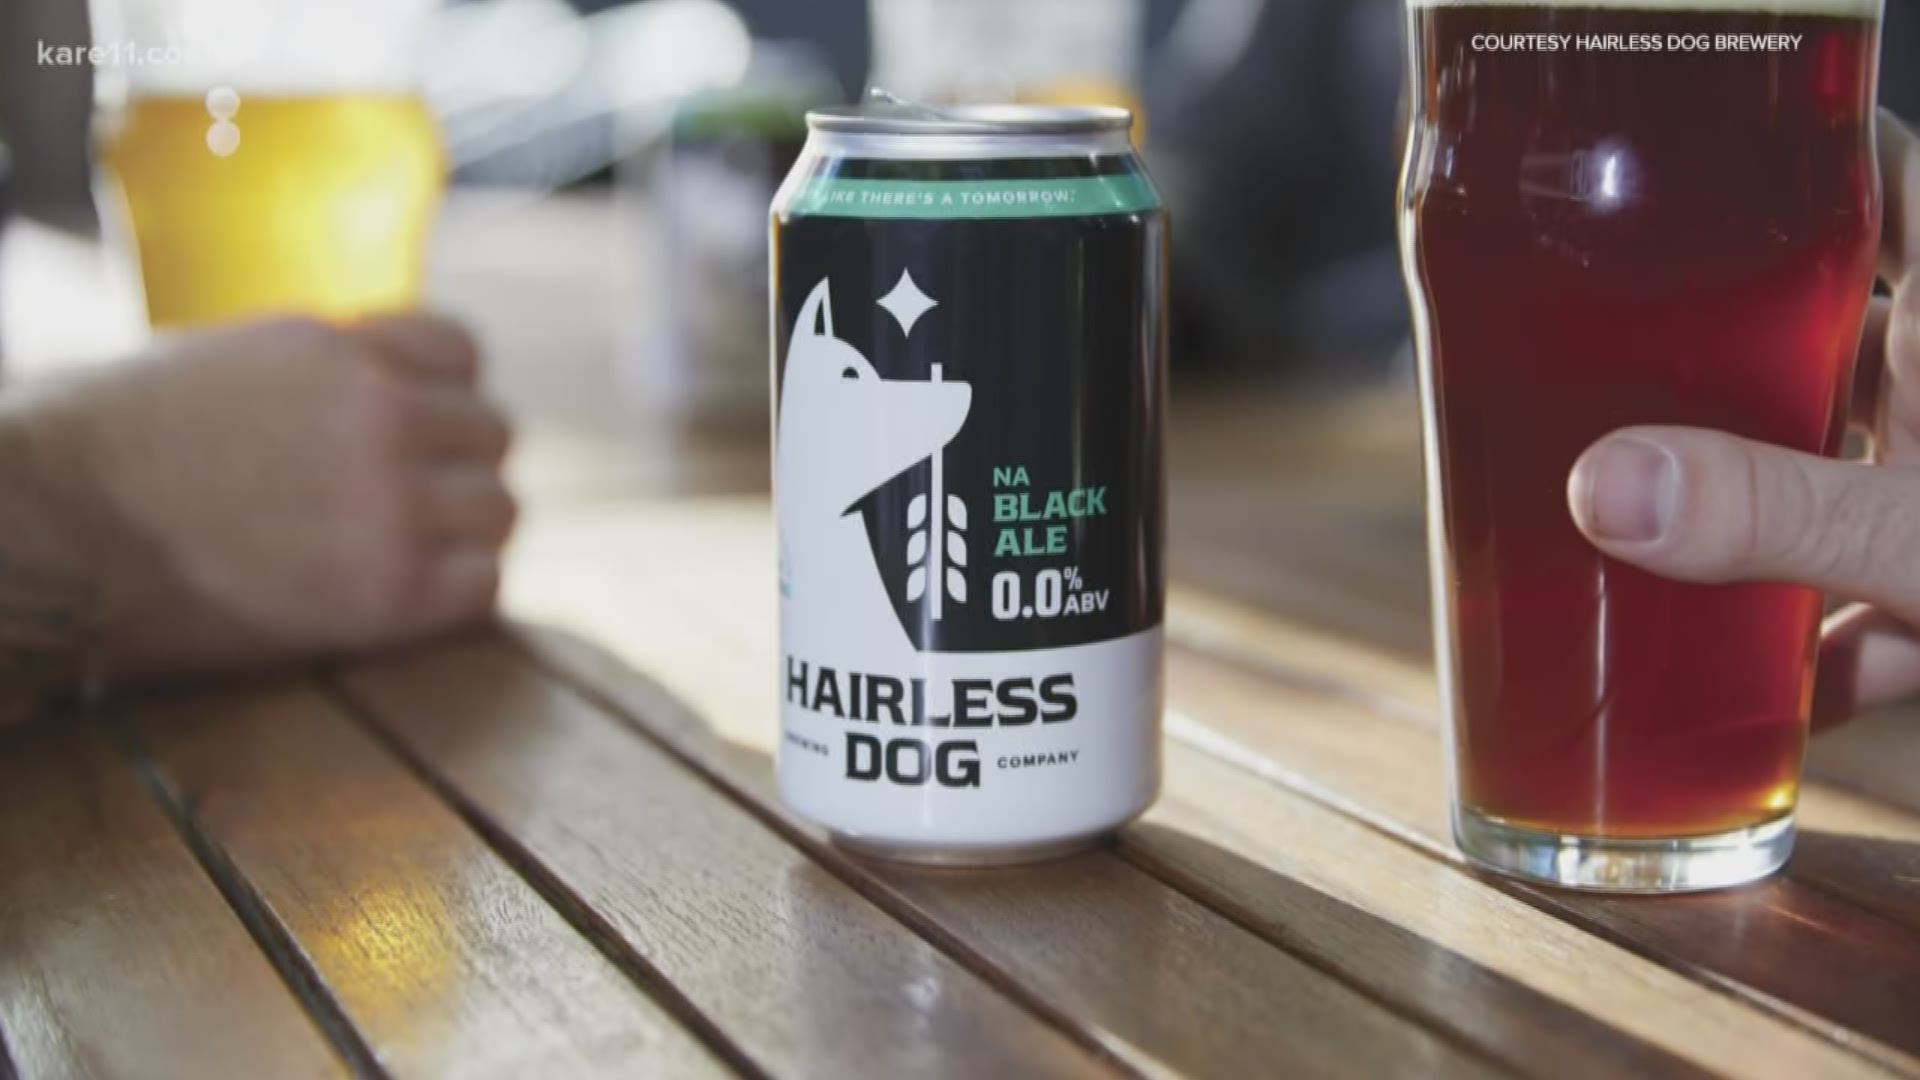 A Minnesota company called Hairless Dog has created a non-alcoholic beer.